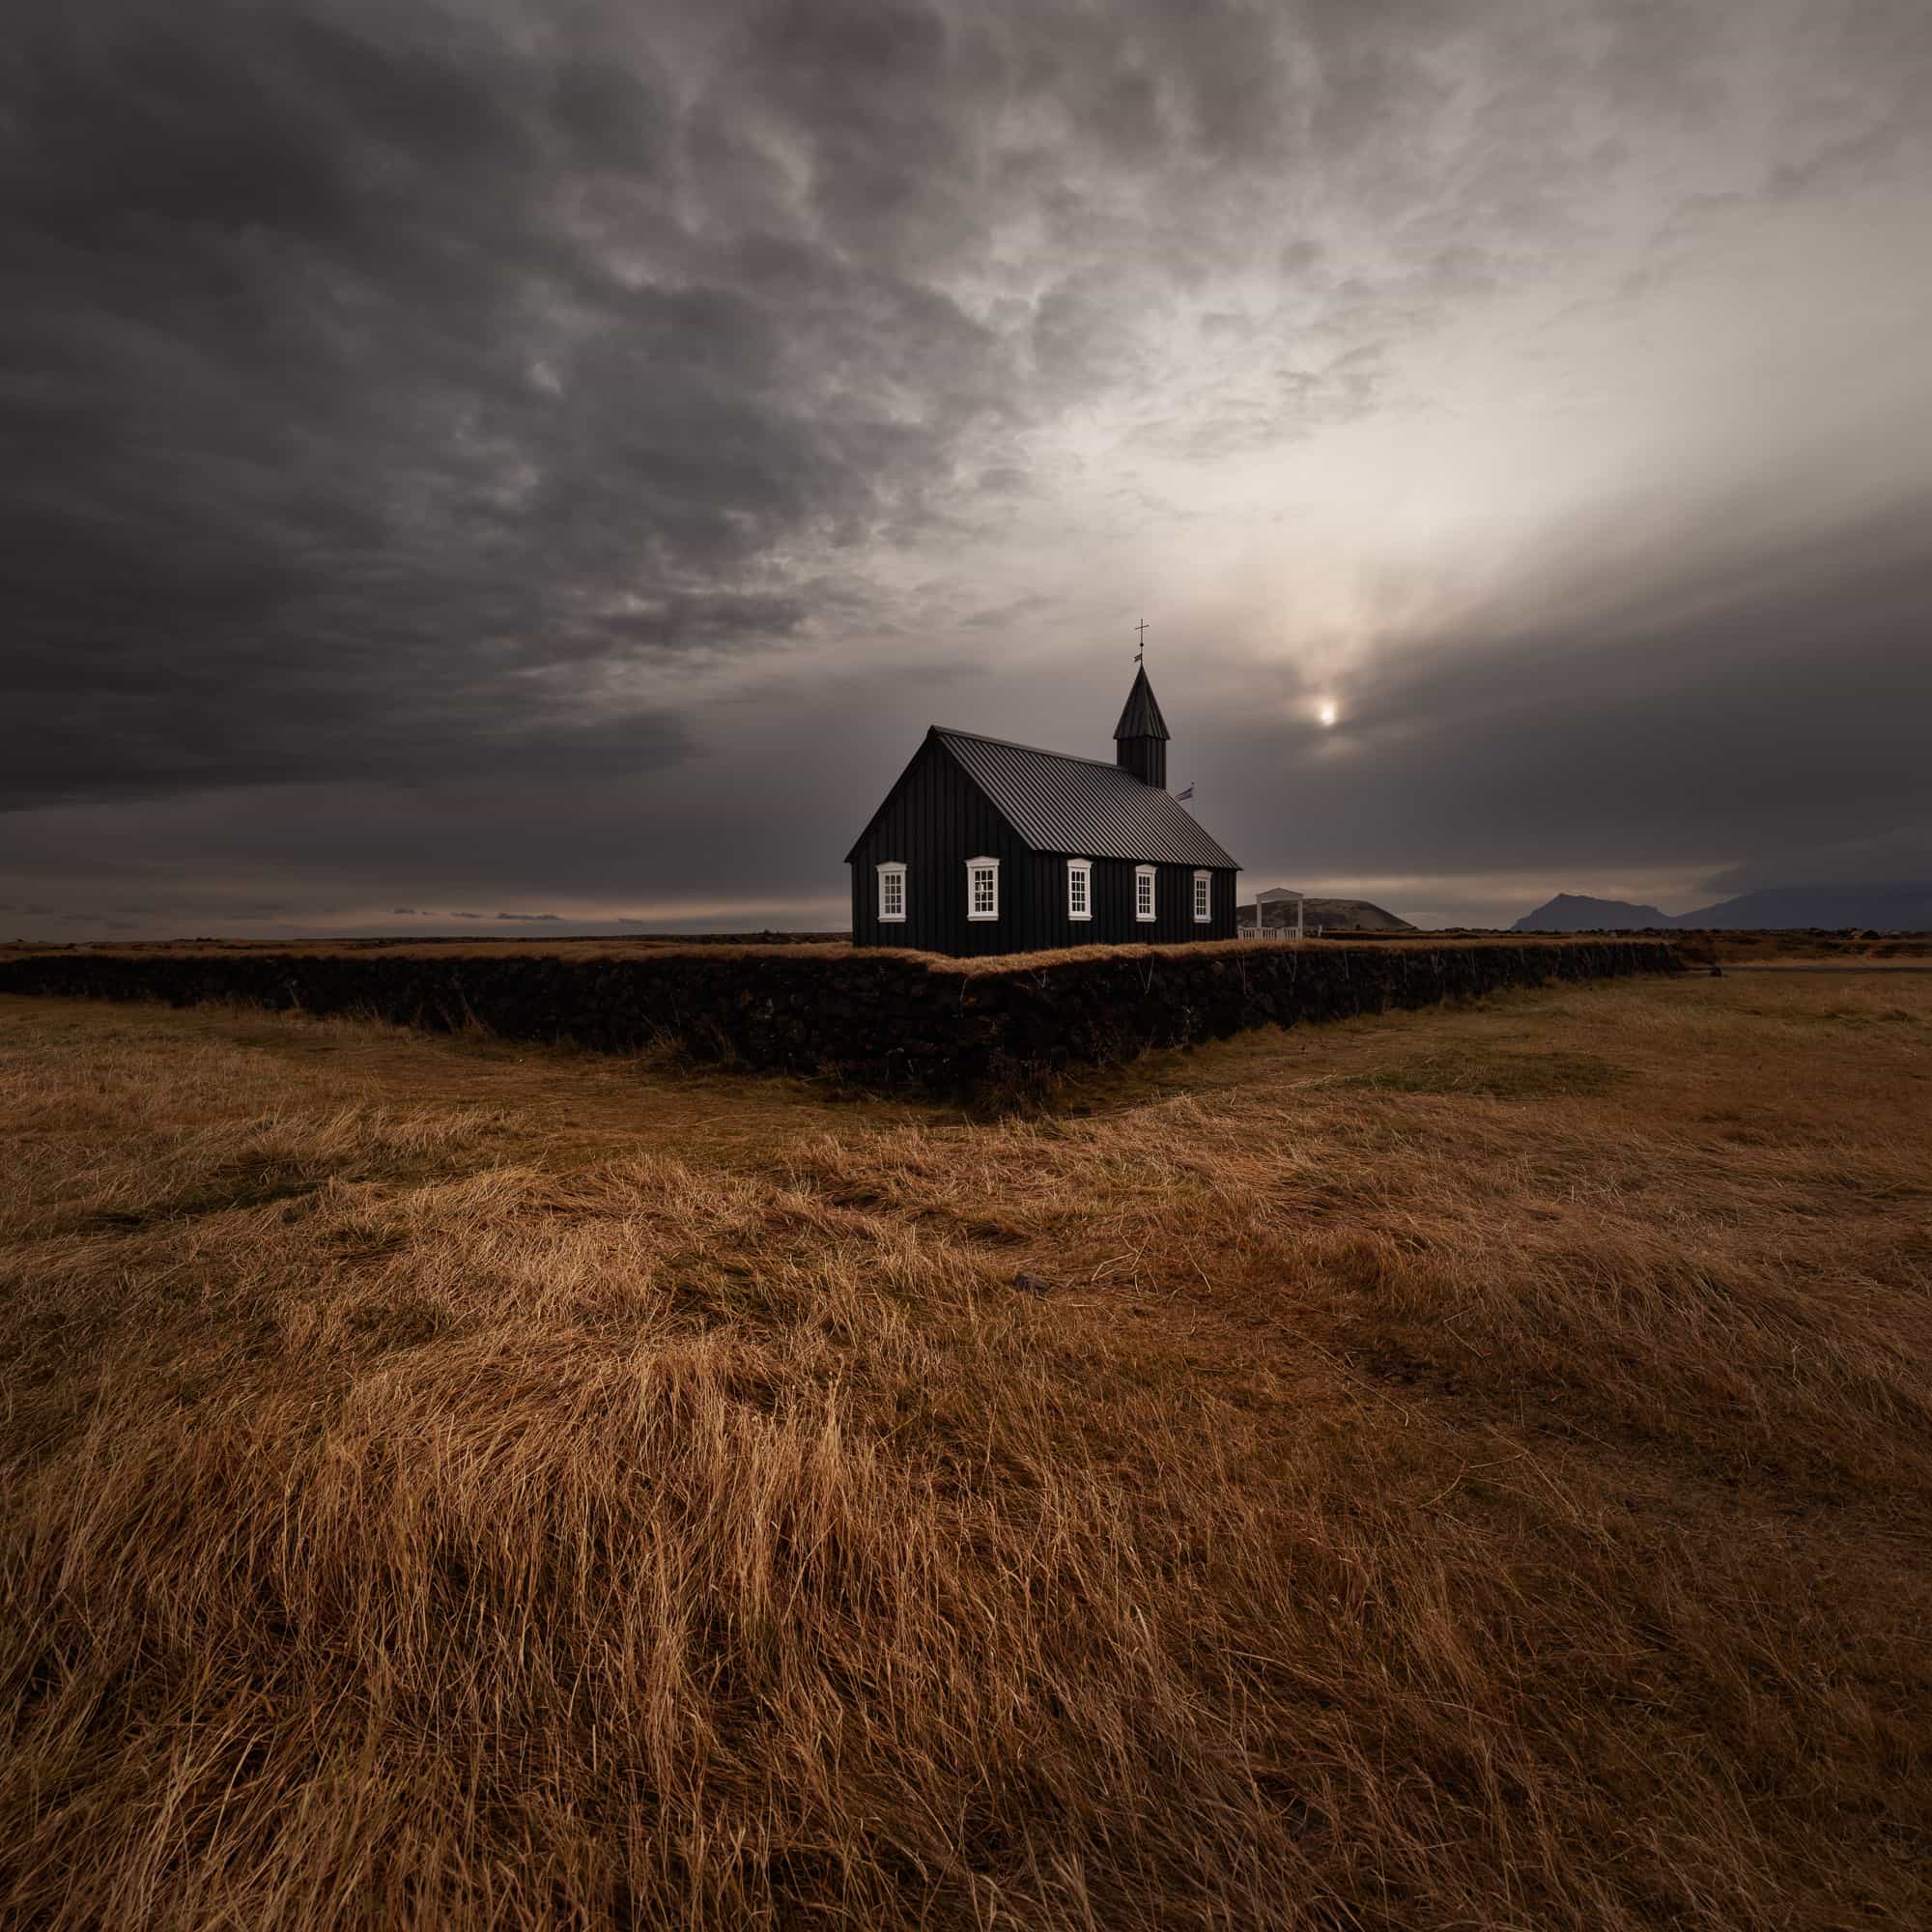 A dark, solitary church in the open Icelandic landscape with dry grass in the foreground and a dramatic, cloud-filled sky above, capturing a moment of quietude before a storm.